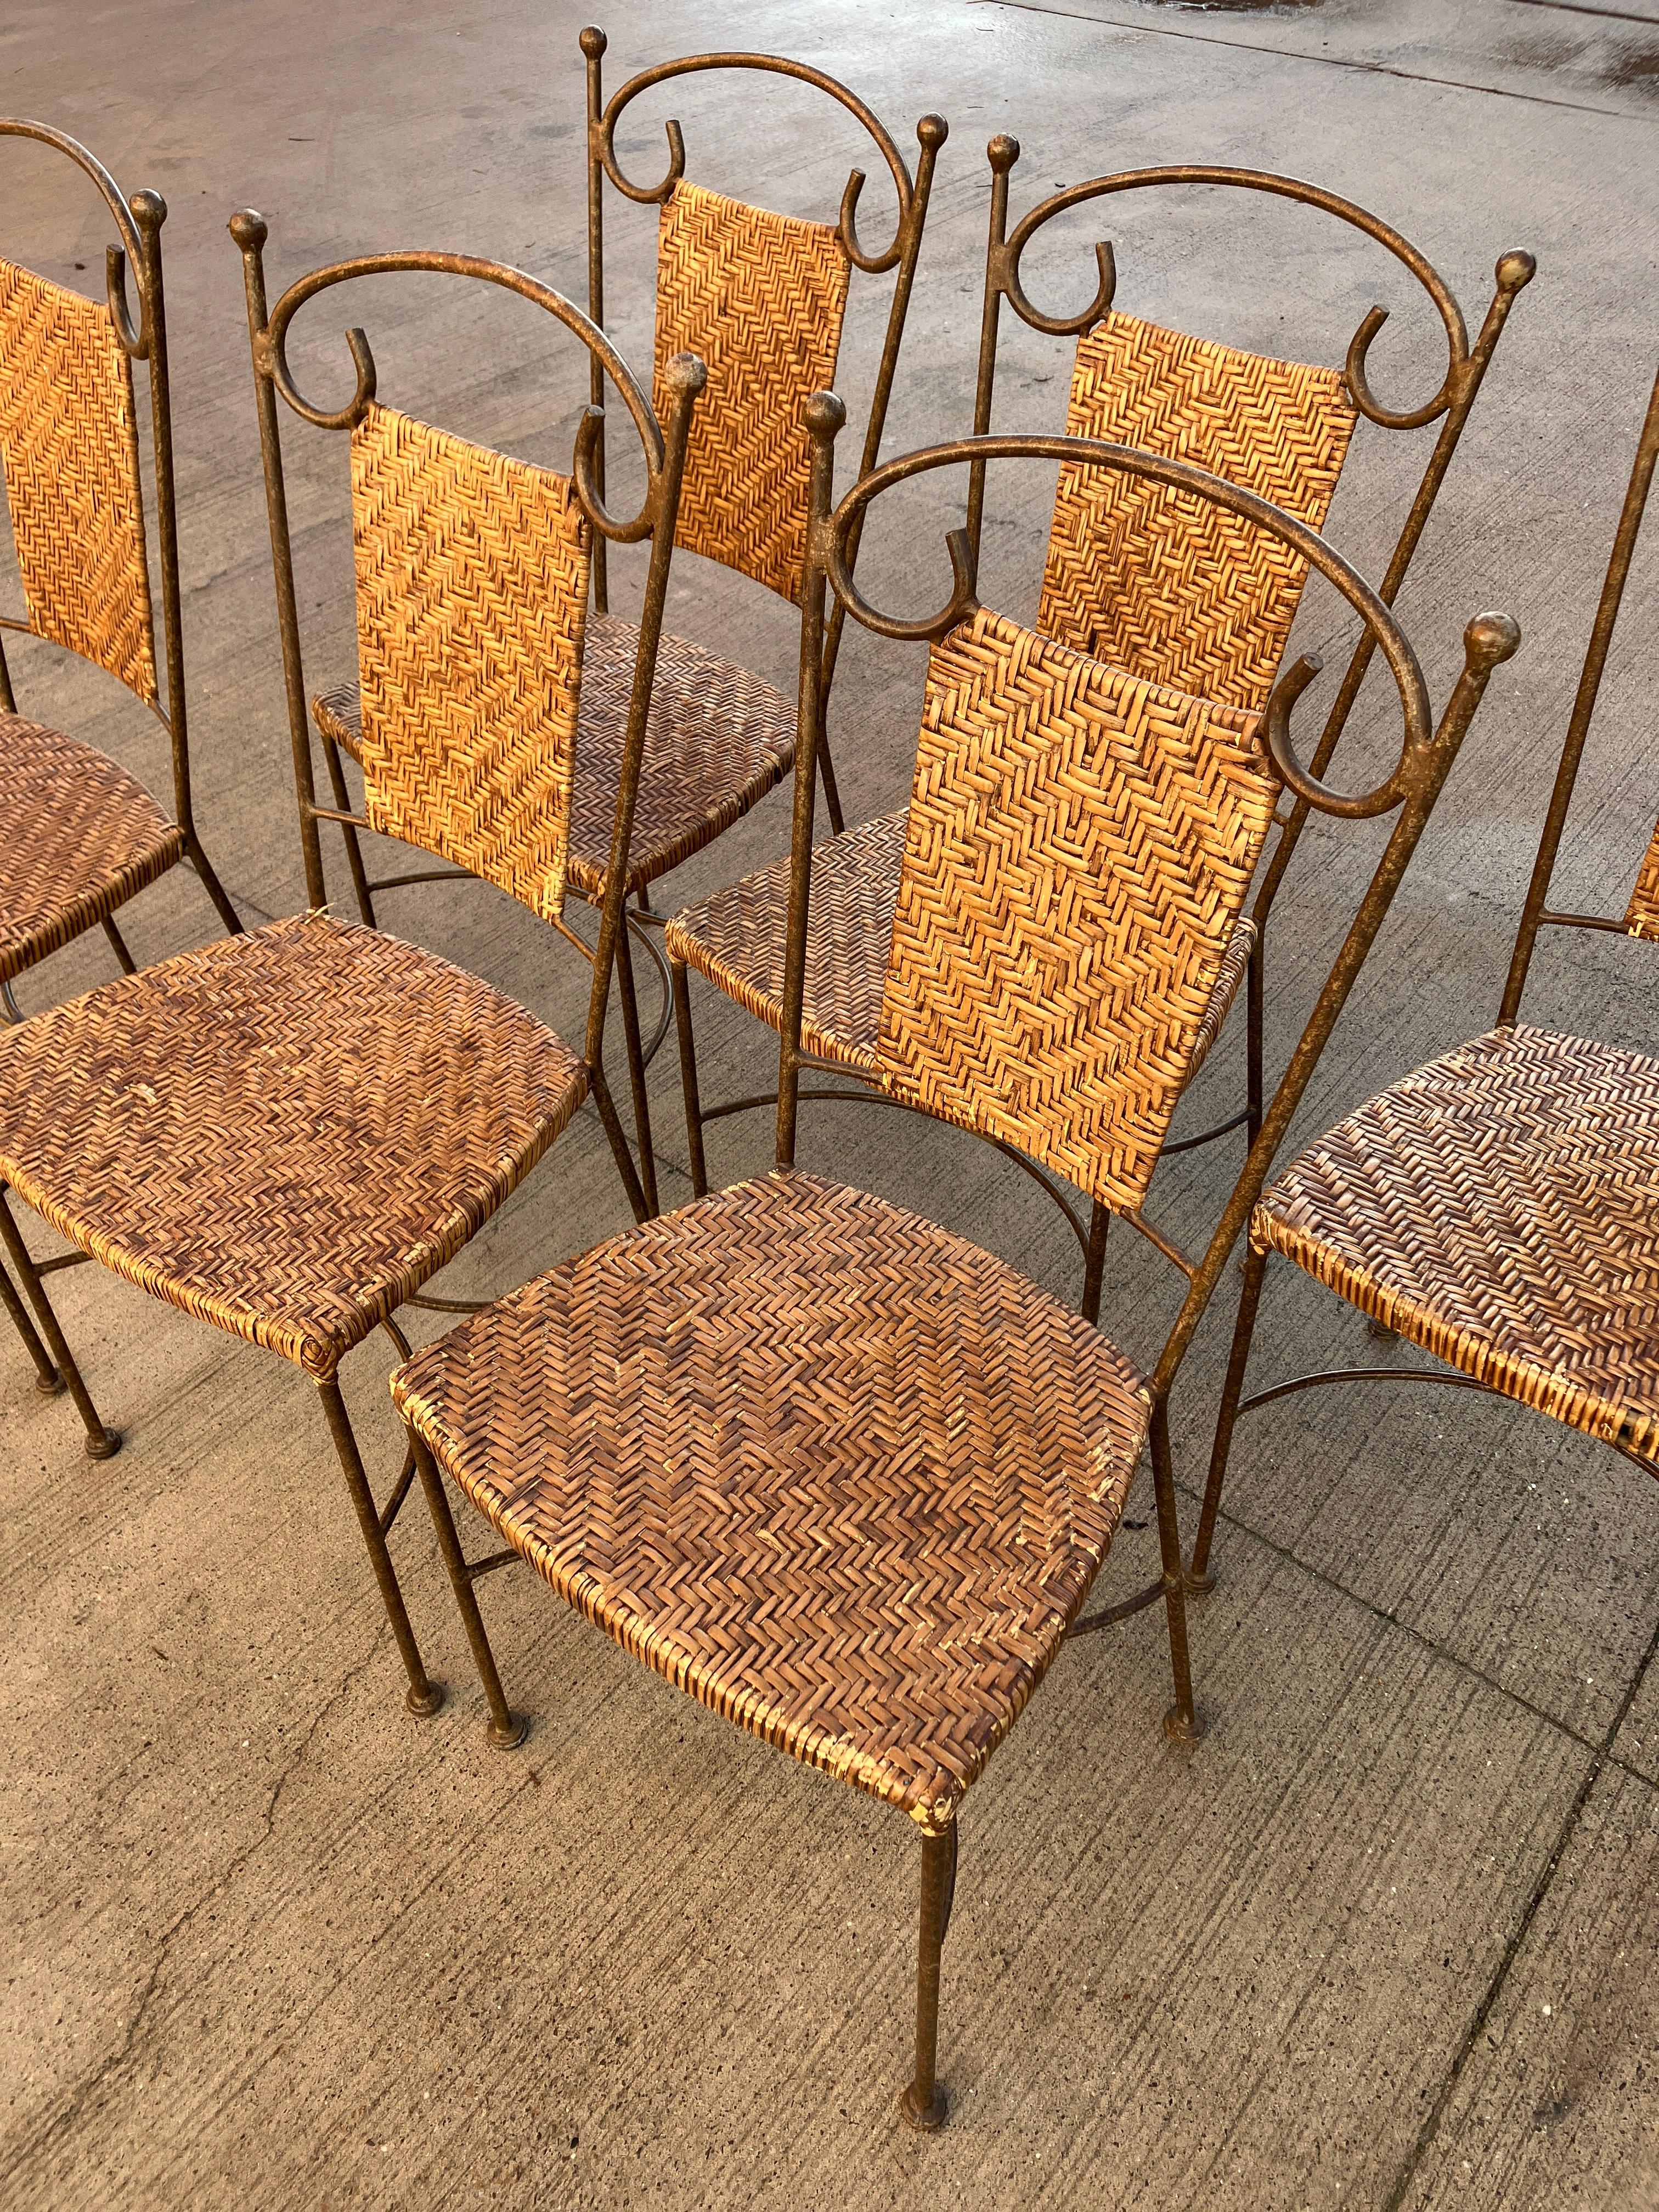 Vintage wrought Iron Dining Chairs with Wicker Seating x 6 For Sale 6